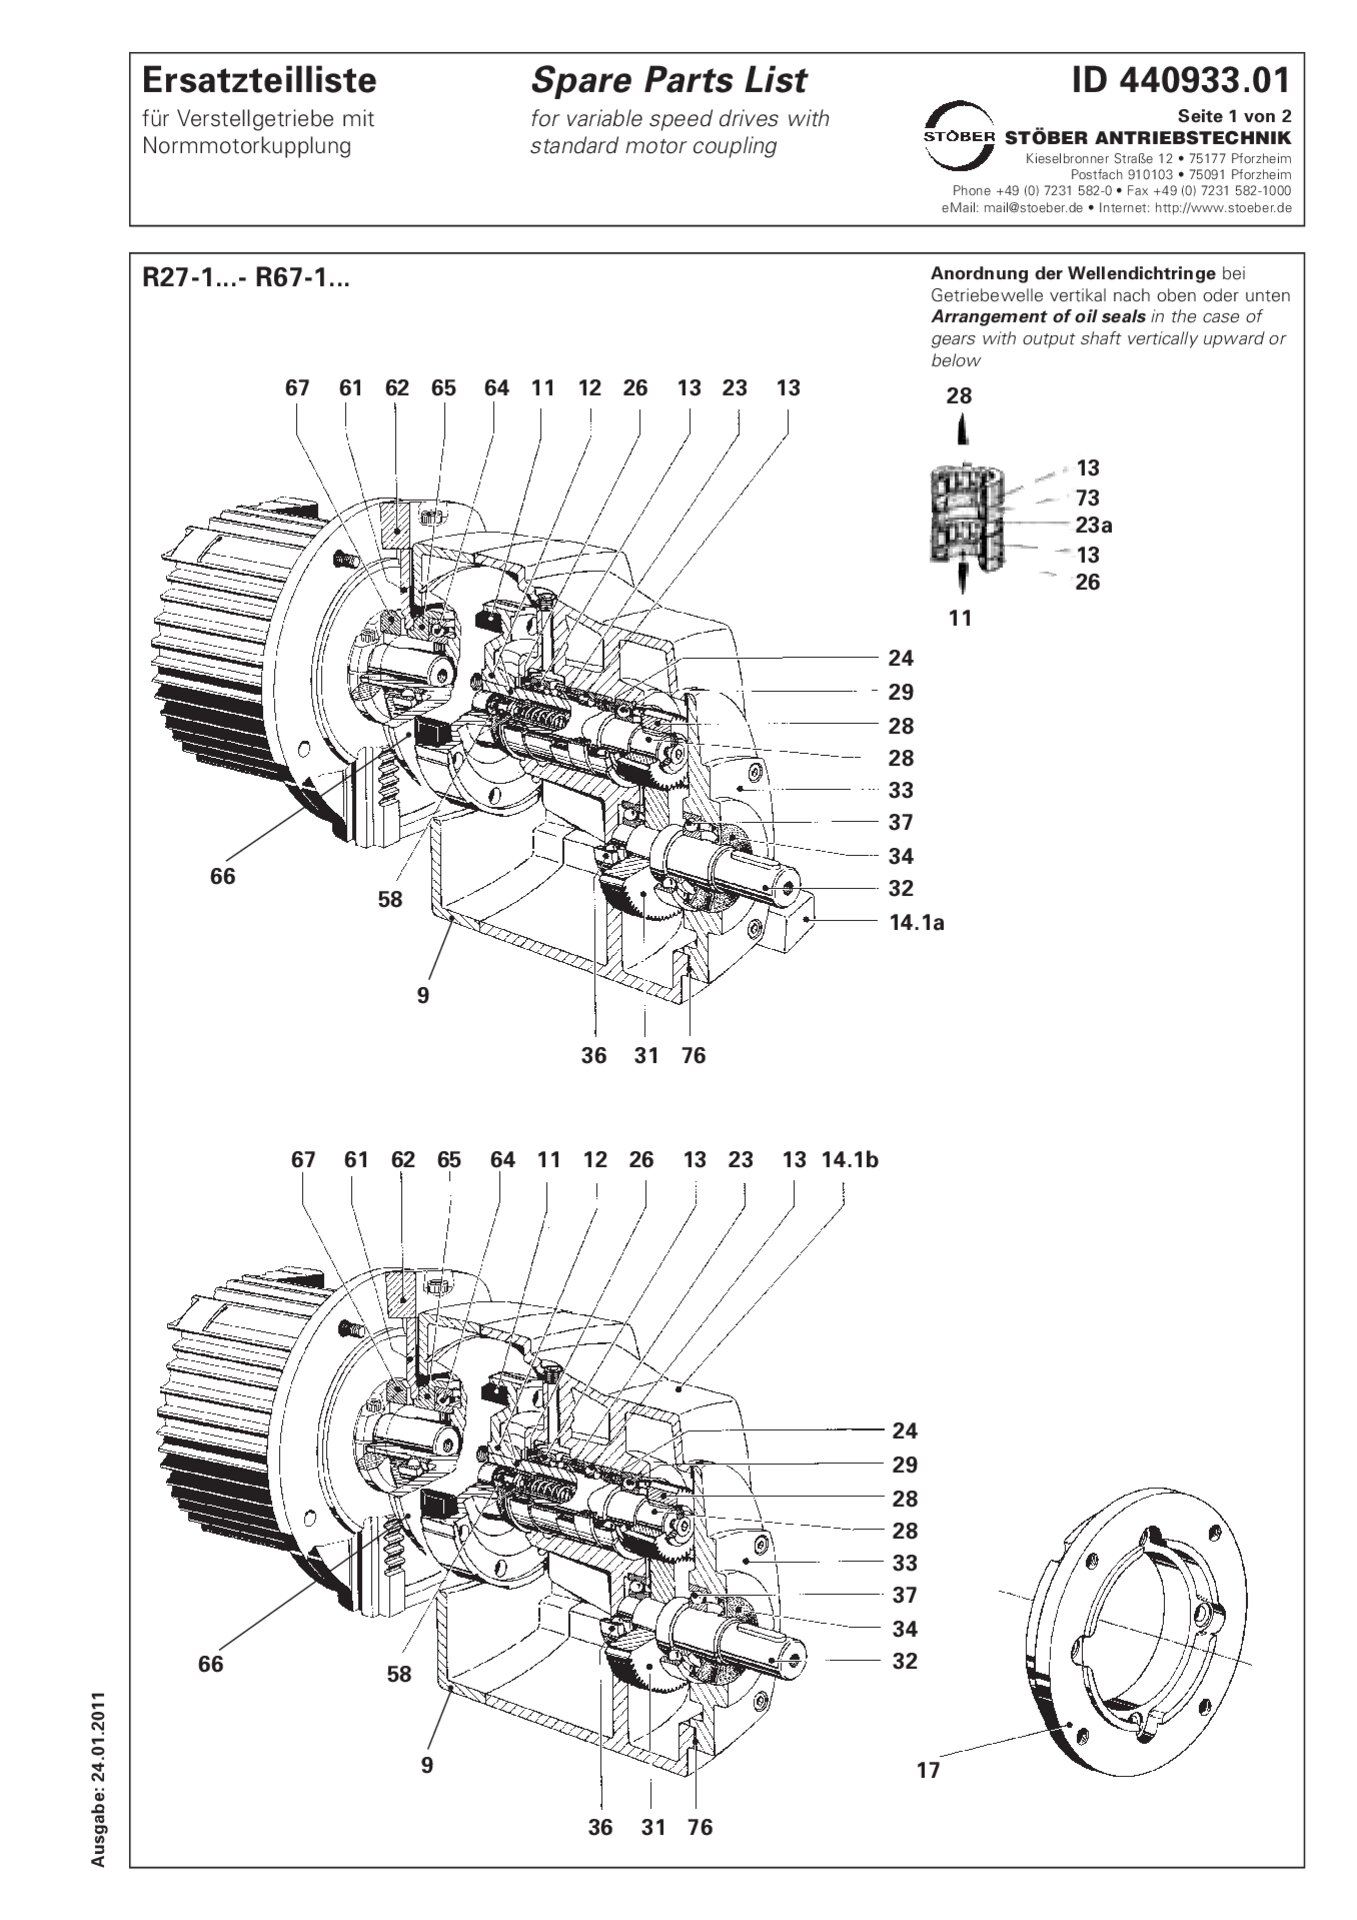 Spare parts list R27-1/R37-1/R47-1/R57-1/R67-1 with standard motor coupling